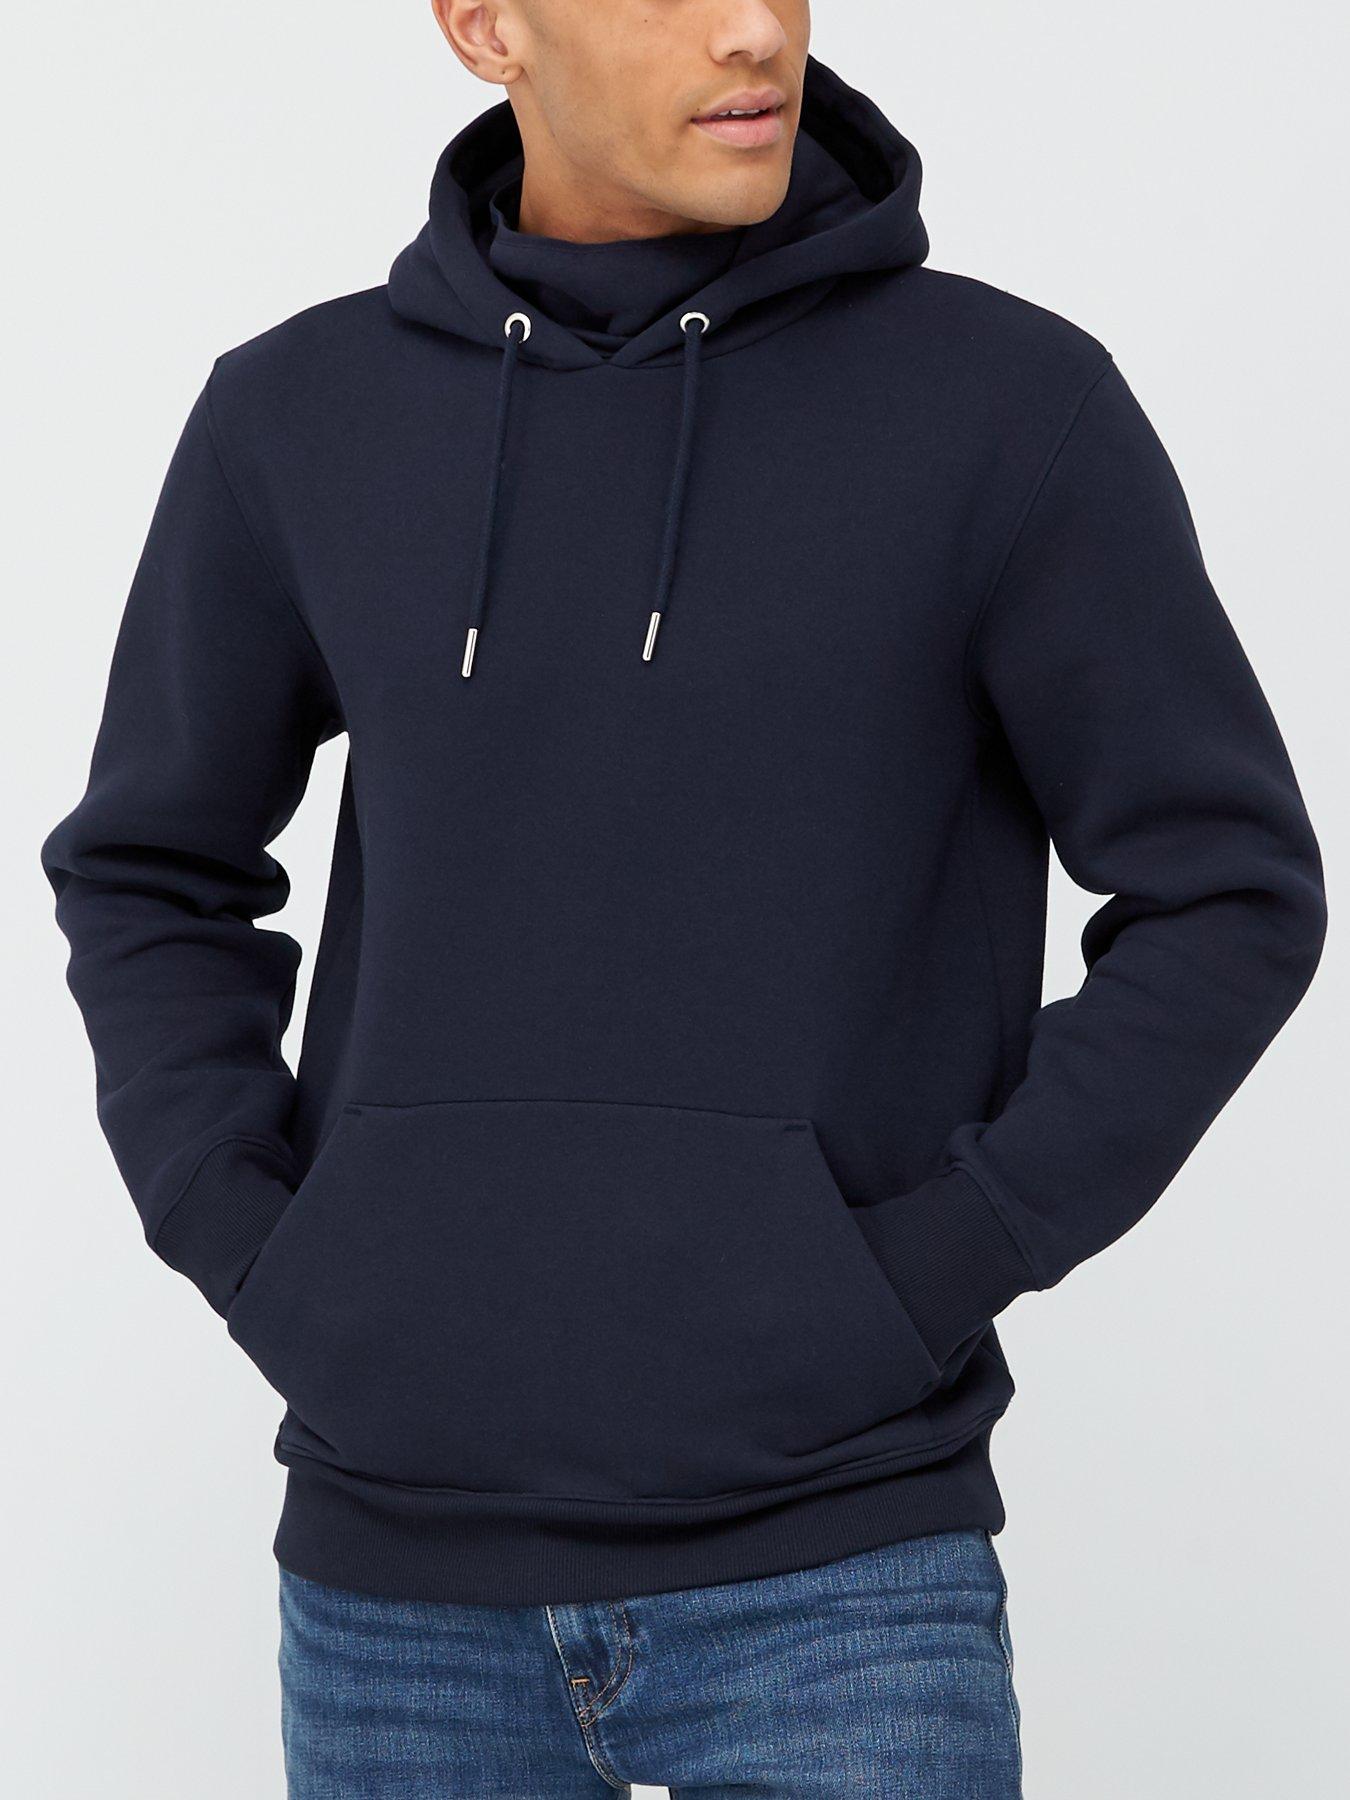 Very Man Hoodie With Face Covering - Navy | very.co.uk